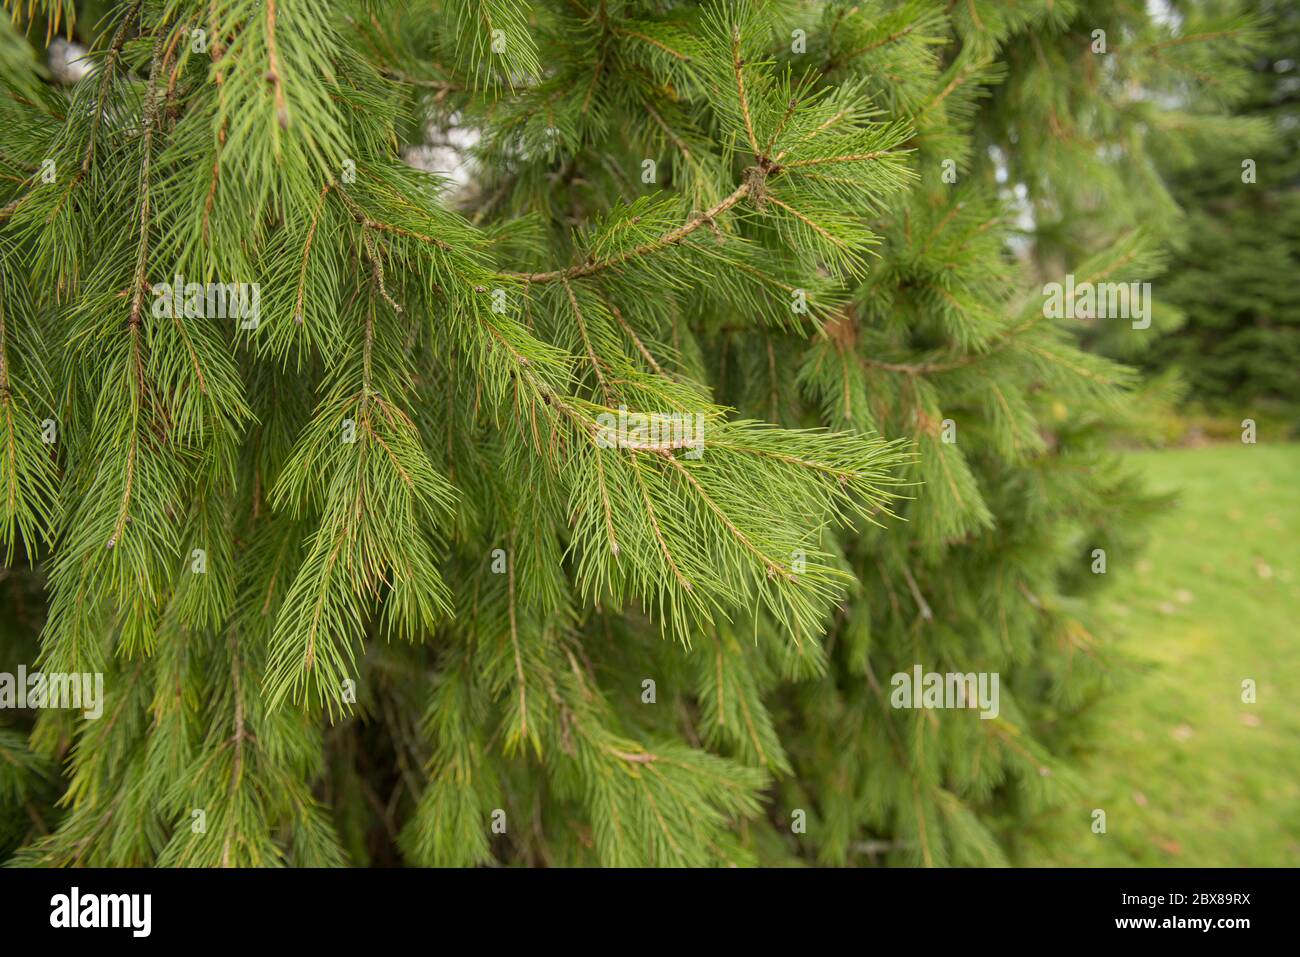 New Spring Growth on a Morinda or West Himalayan Spruce Tree (Picea smithiana) in a Garden in Rural Devon, England, UK Stock Photo